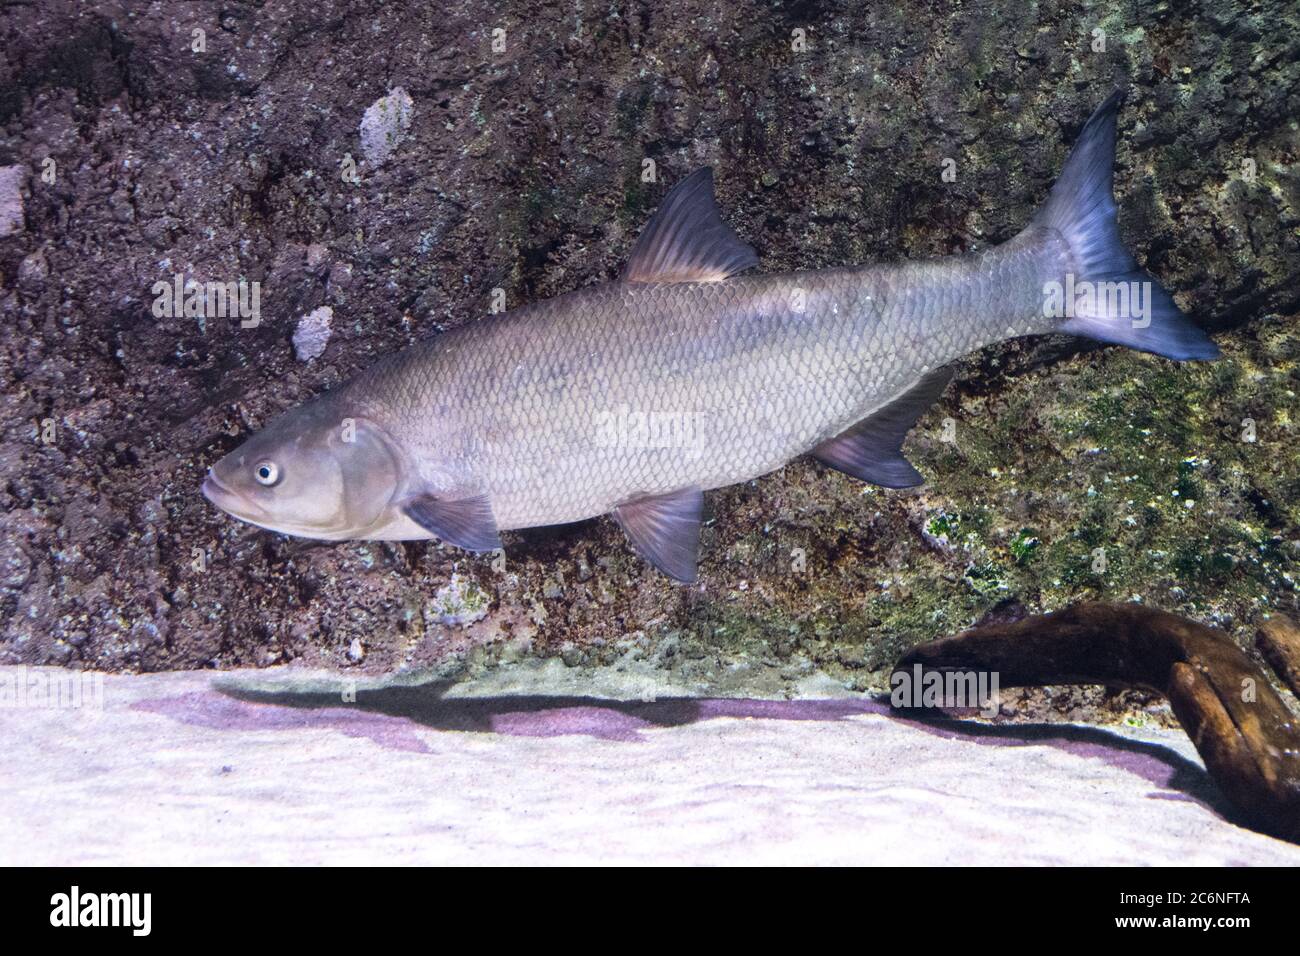 Asp fish, European freshwater fish of the Cyprinid family, underwater Stock Photo